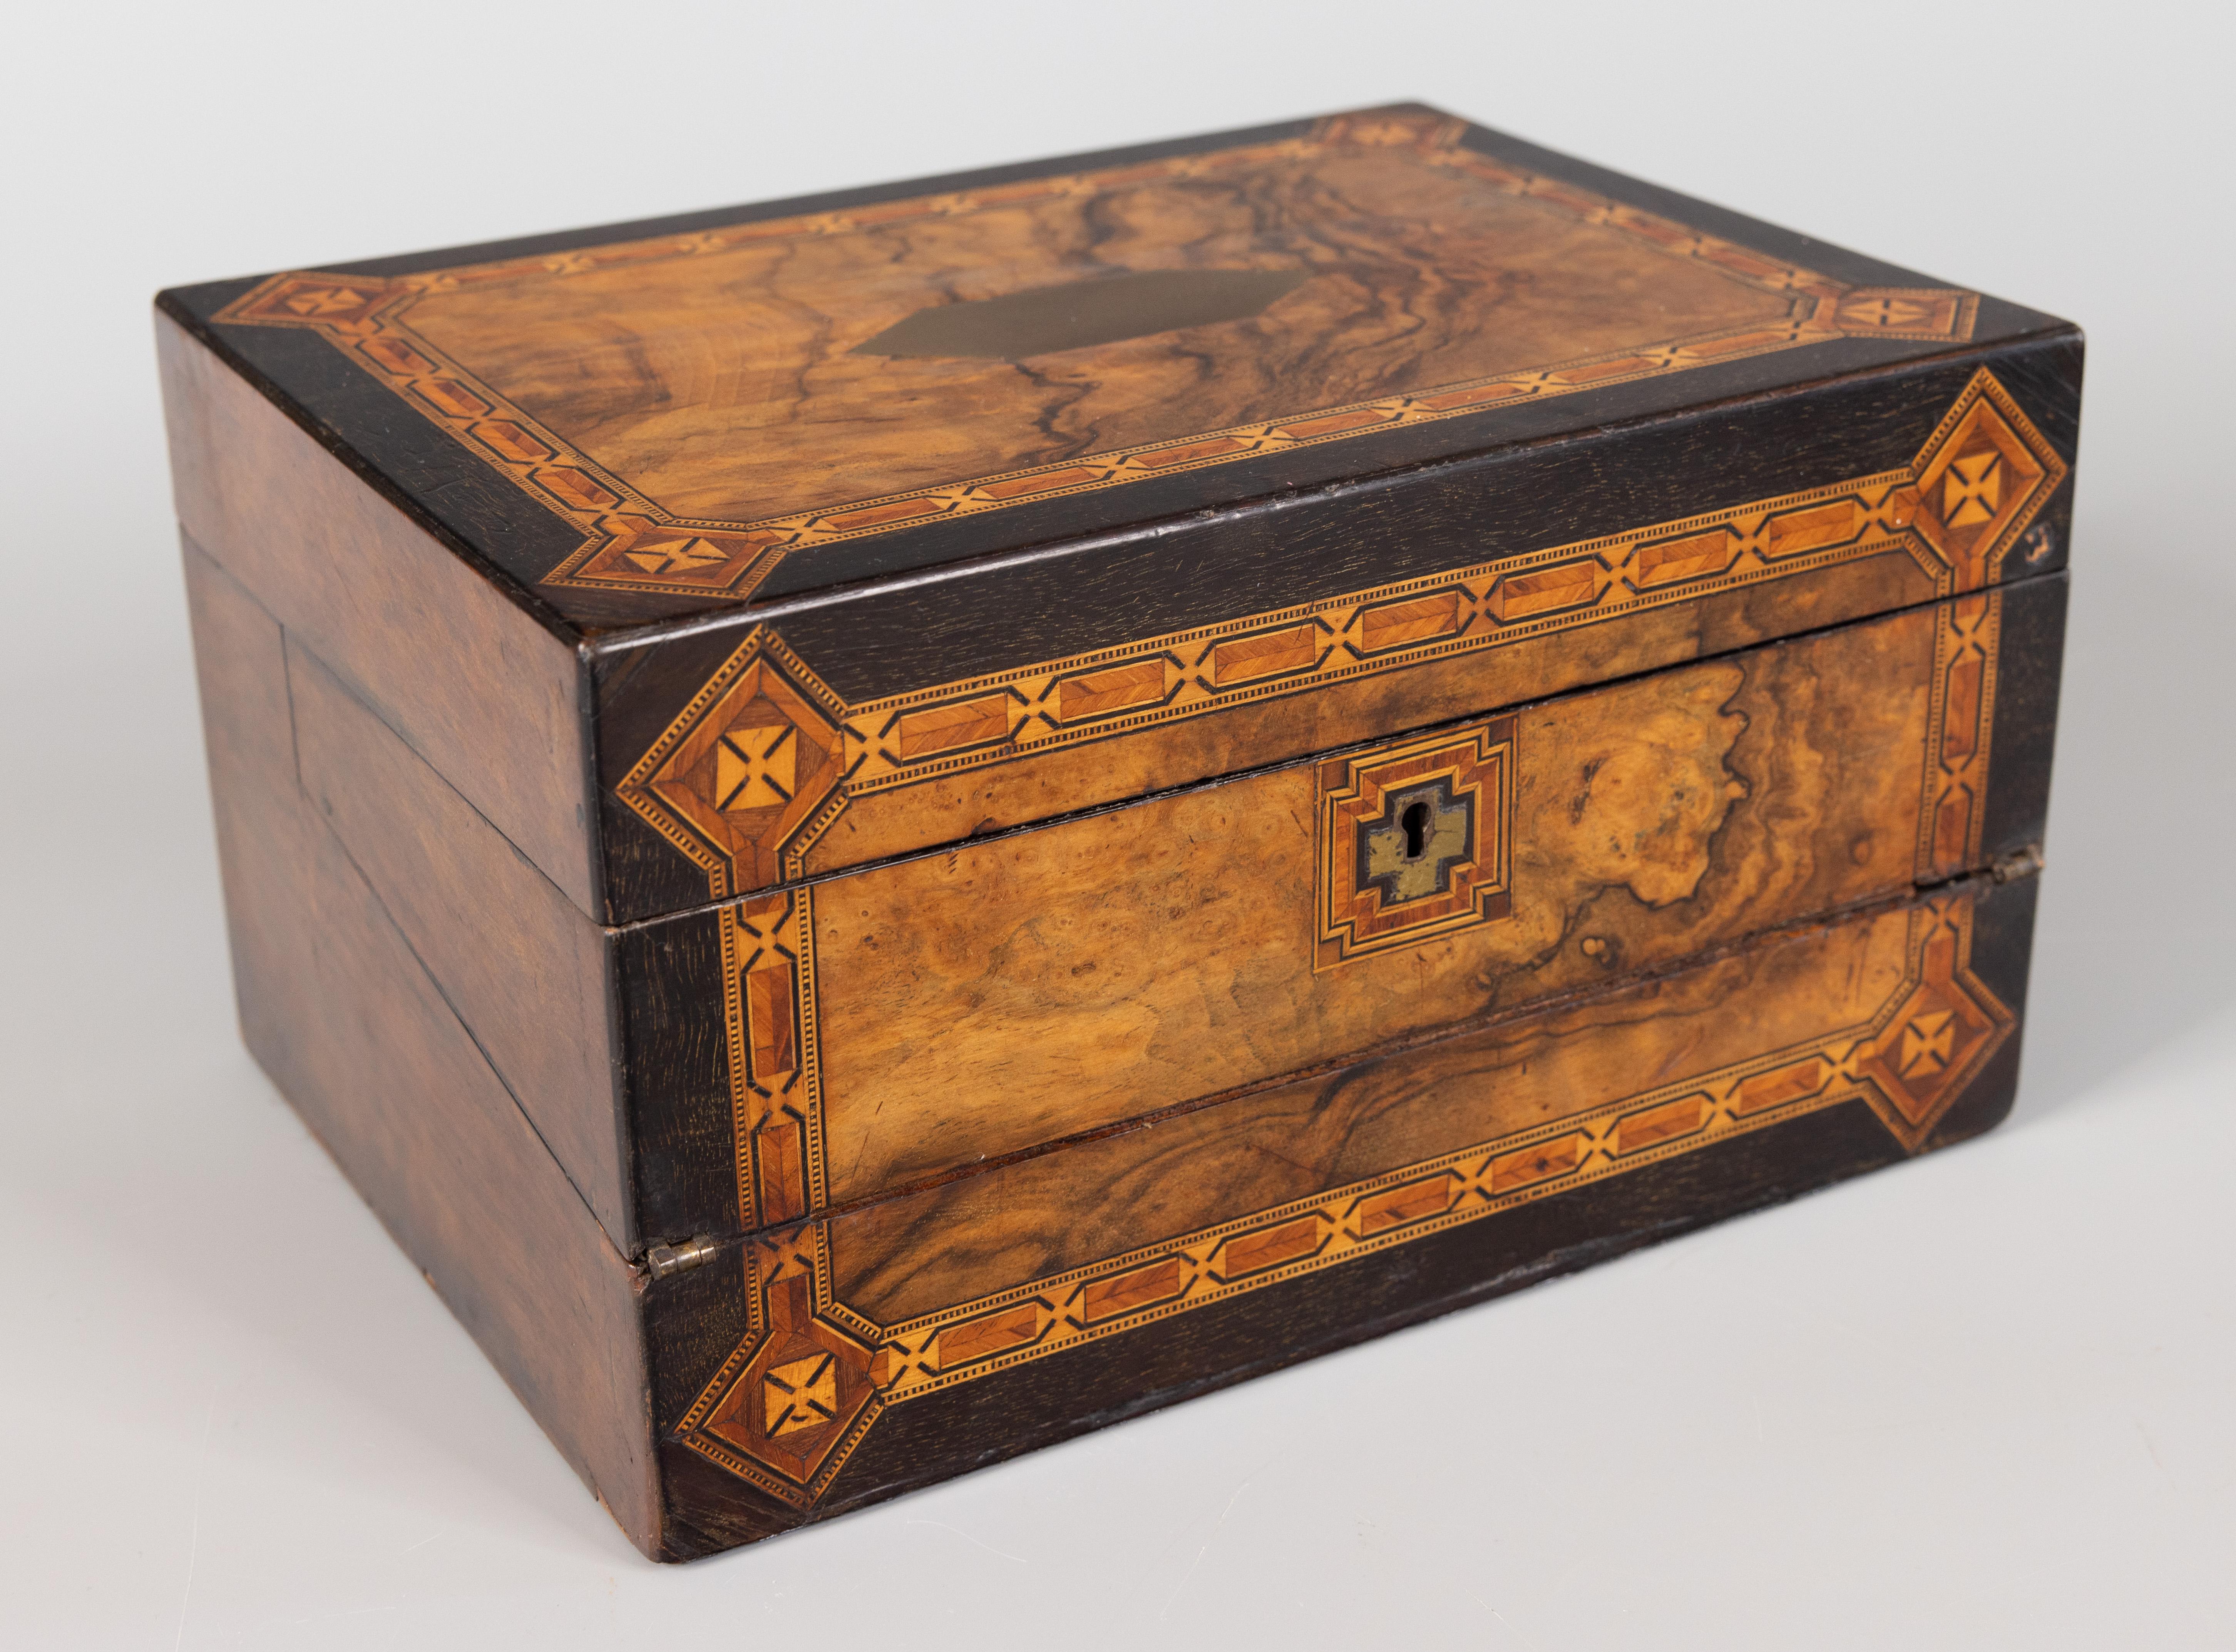 A superb antique English burl walnut and ebony inlaid tunbridge writing slope box / lap desk, circa 1870. This handsome box opens to reveal a leather writing surface, pen tray compartment, and the original glass inkwells. The writing surface opens